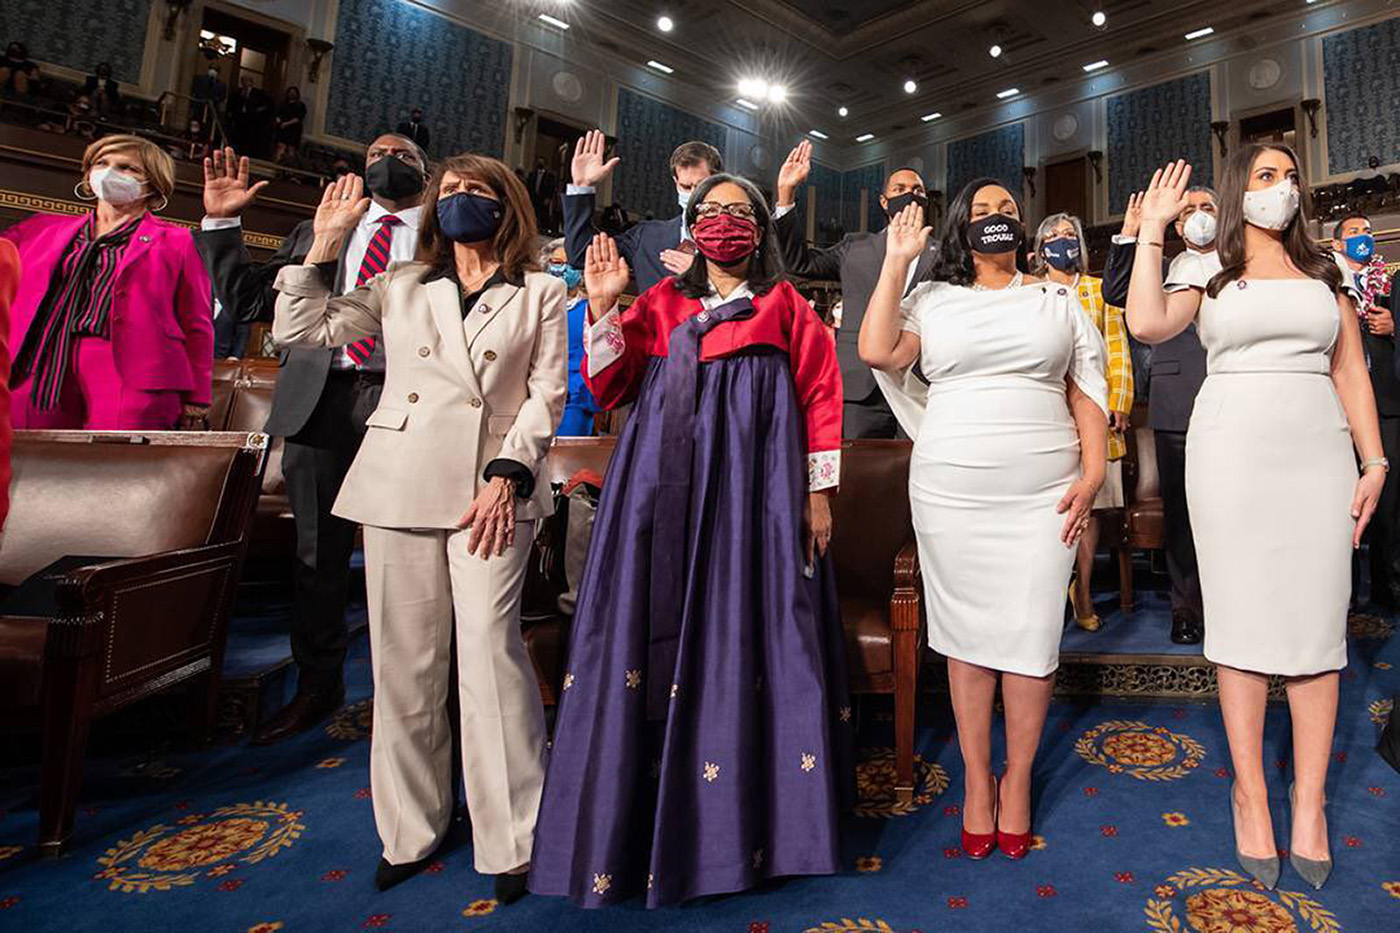 PHOTO: Marilyn Strickland, center, wore a Hanbok to symbolize her Korean heritage at the swearing-in ceremony for new members of the U.S. House of Representatives in Washington, Jan. 3, 2021.